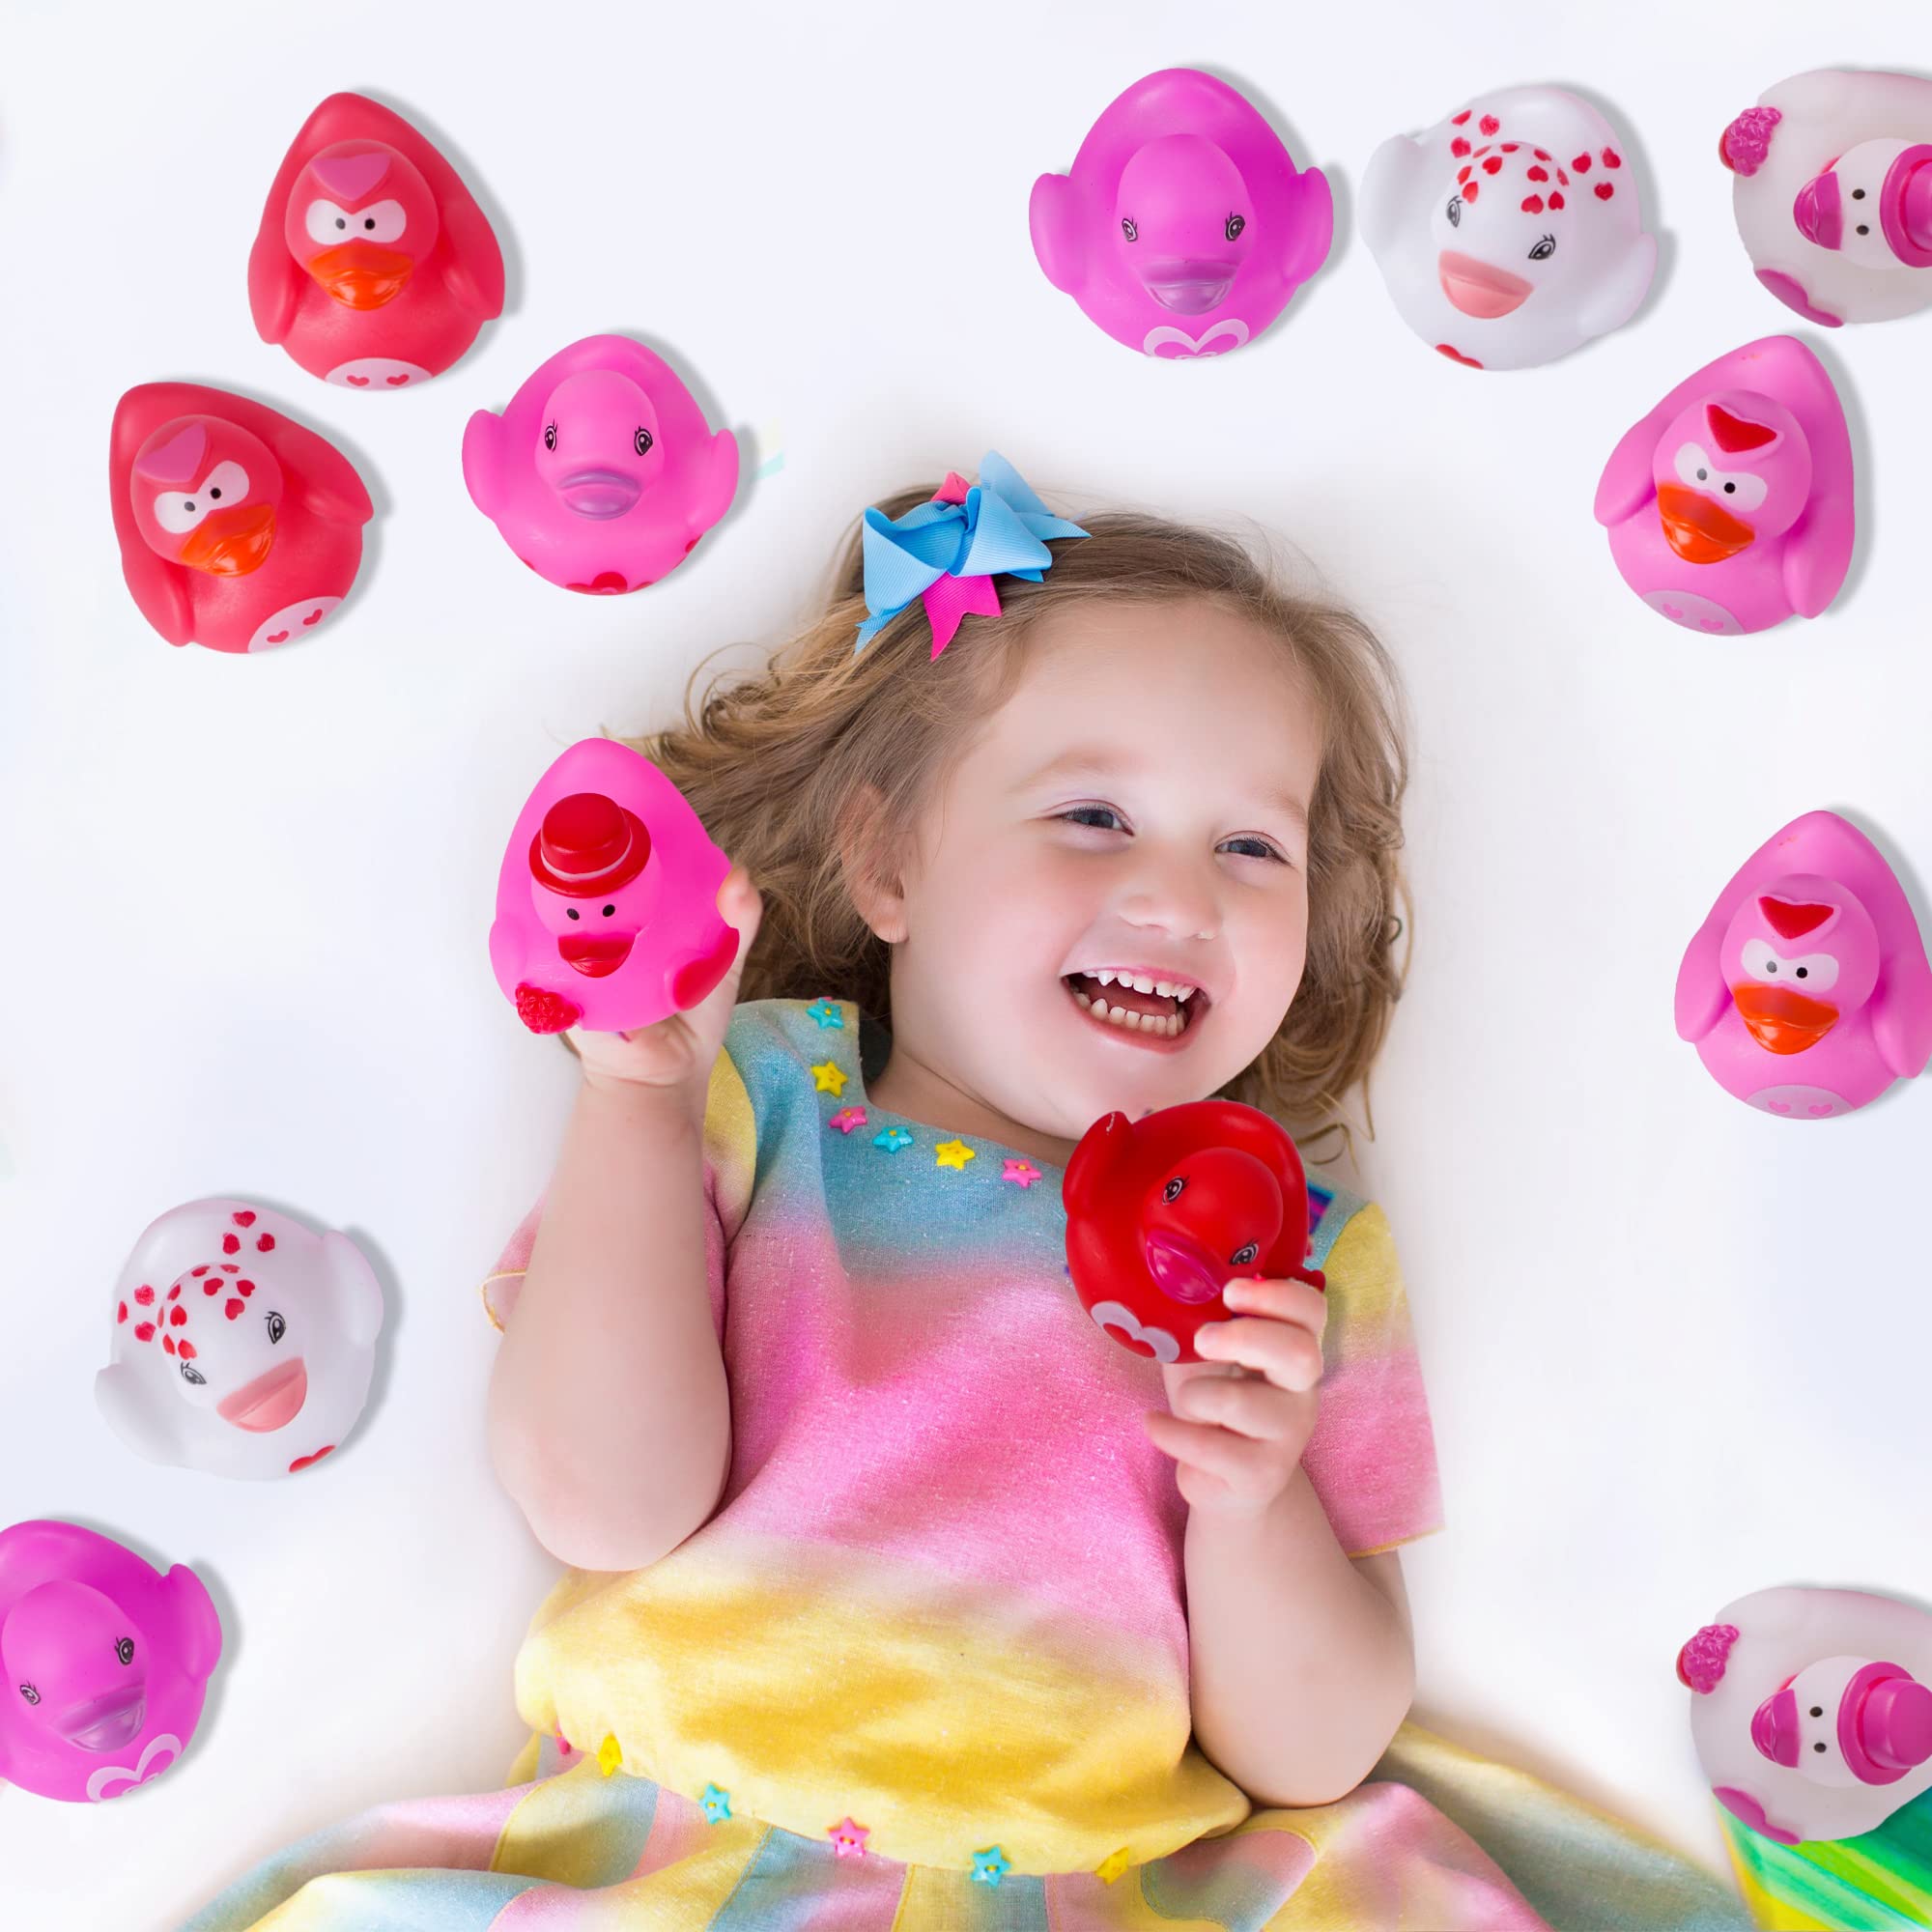 24 Pieces Valentine’s Day Rubber Ducks Novelty Mini Duckies Valentines Day Gifts for Kids Bulk,Valentines Party Favors, Giveaways Treats, Classroom Exchange Gifts